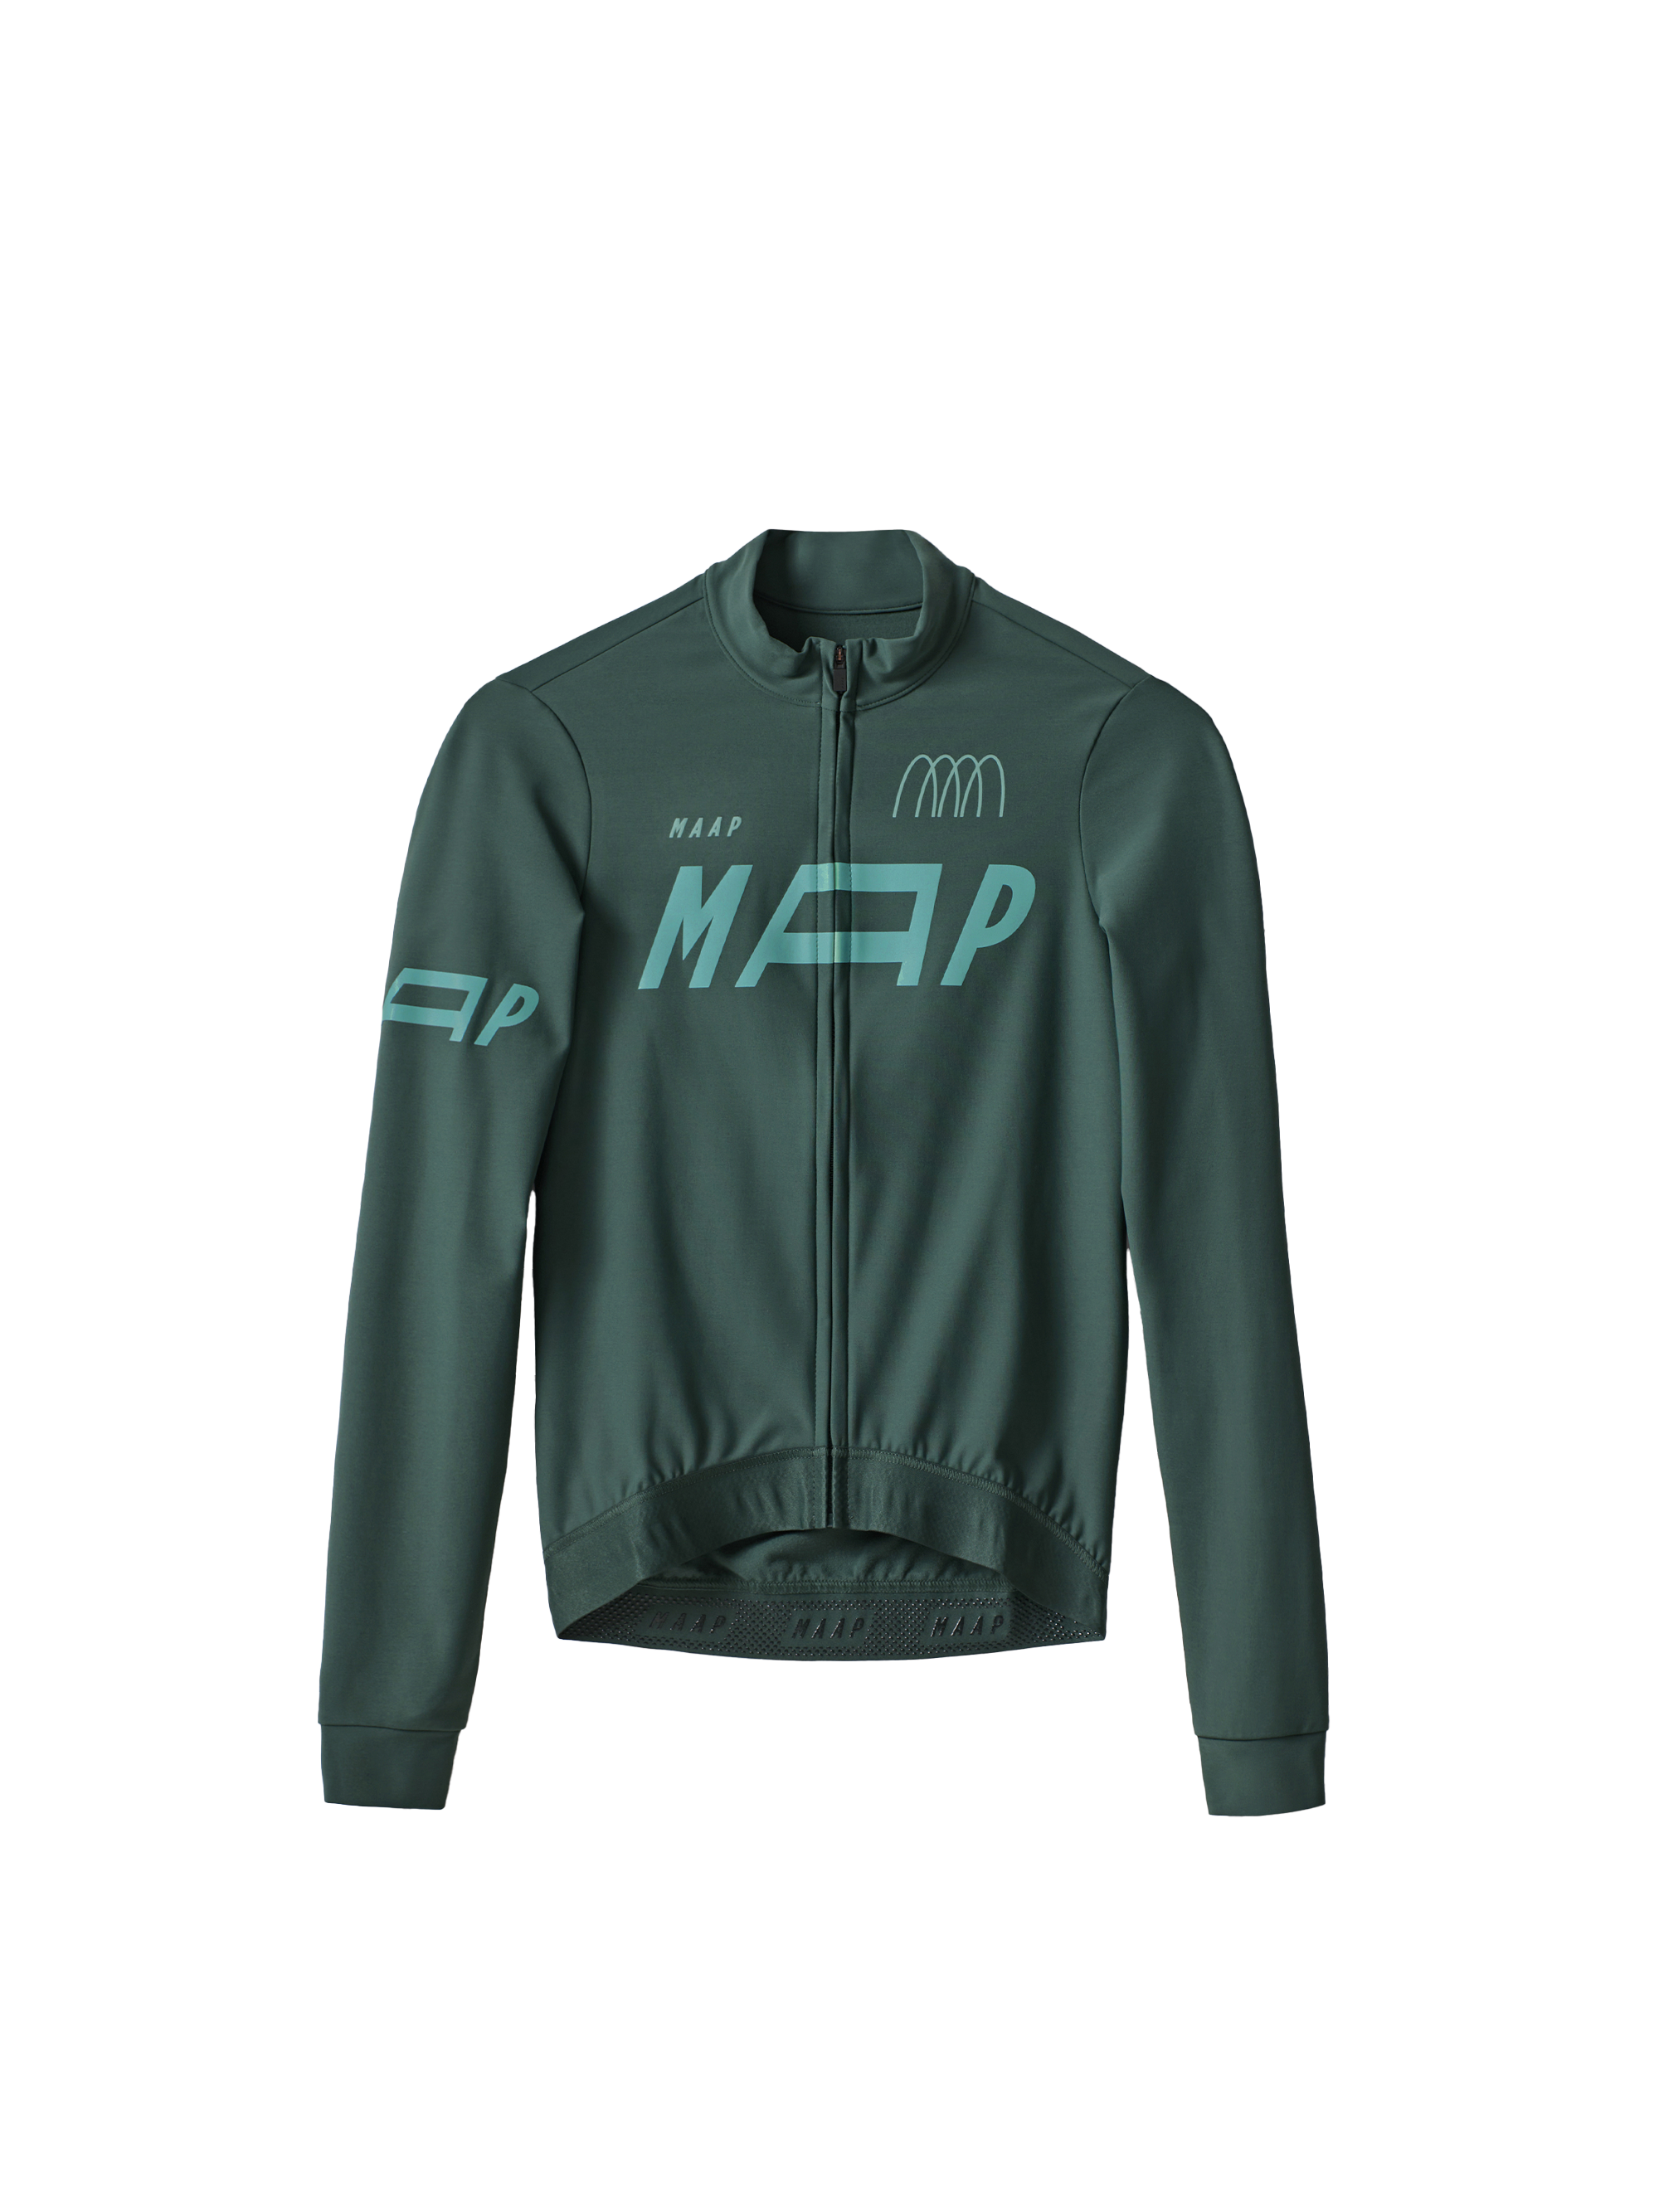 Women's Adapt Thermal LS Jersey - MAAP Cycling Apparel